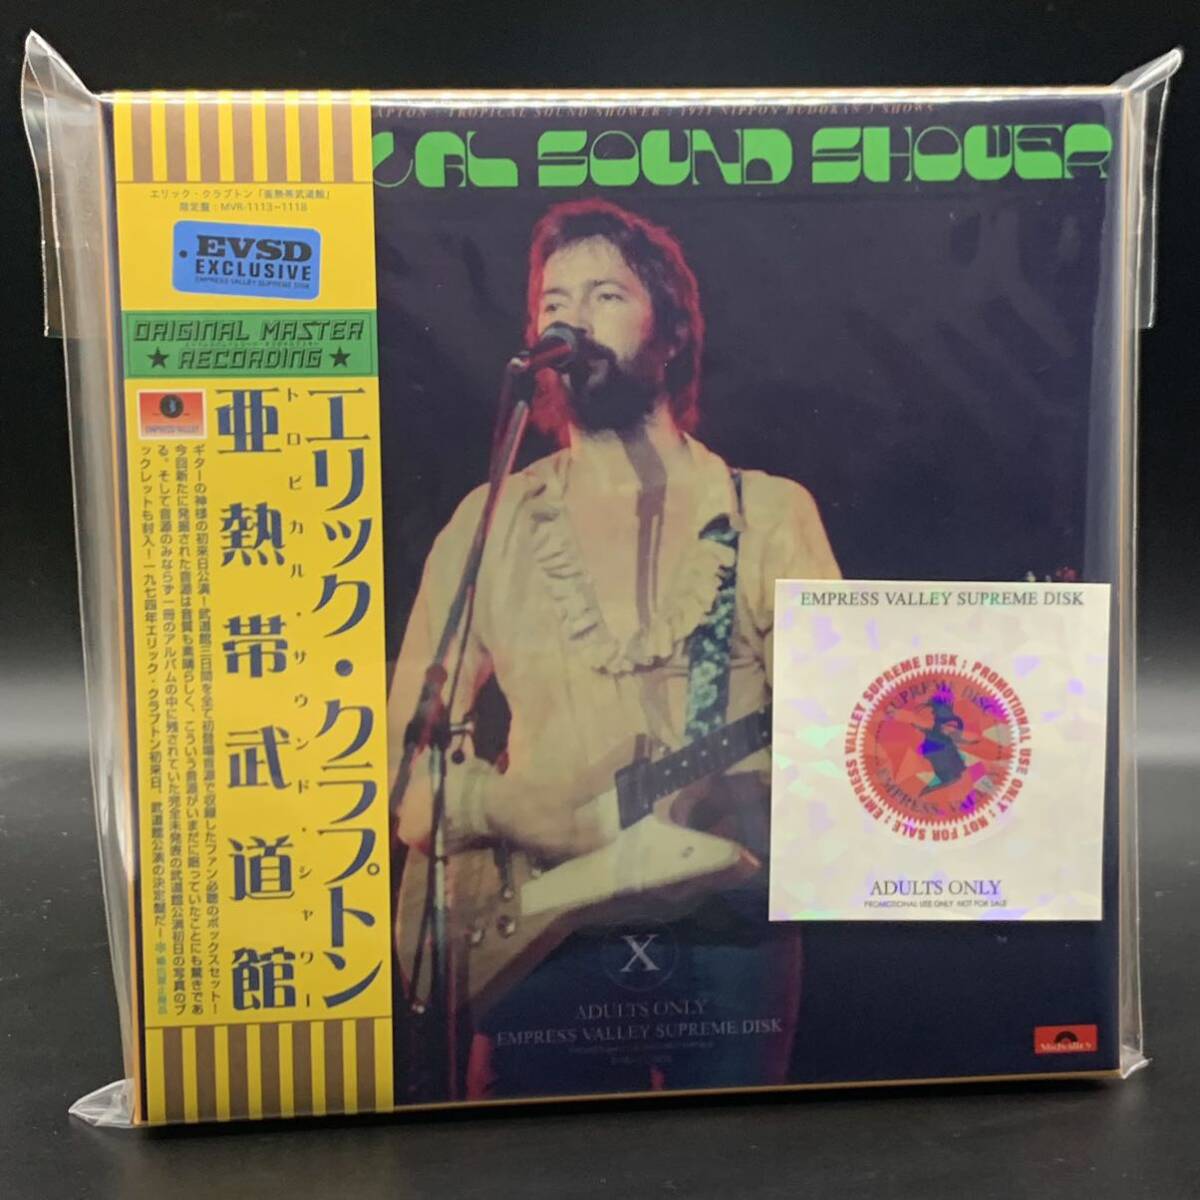 ERIC CLAPTON / TROPICAL SOUND SHOWER「亜熱帯武道館」(6CD BOX with Booklet) 初来日武道館3公演を全て初登場音源で収録した凄いやつ！の画像1